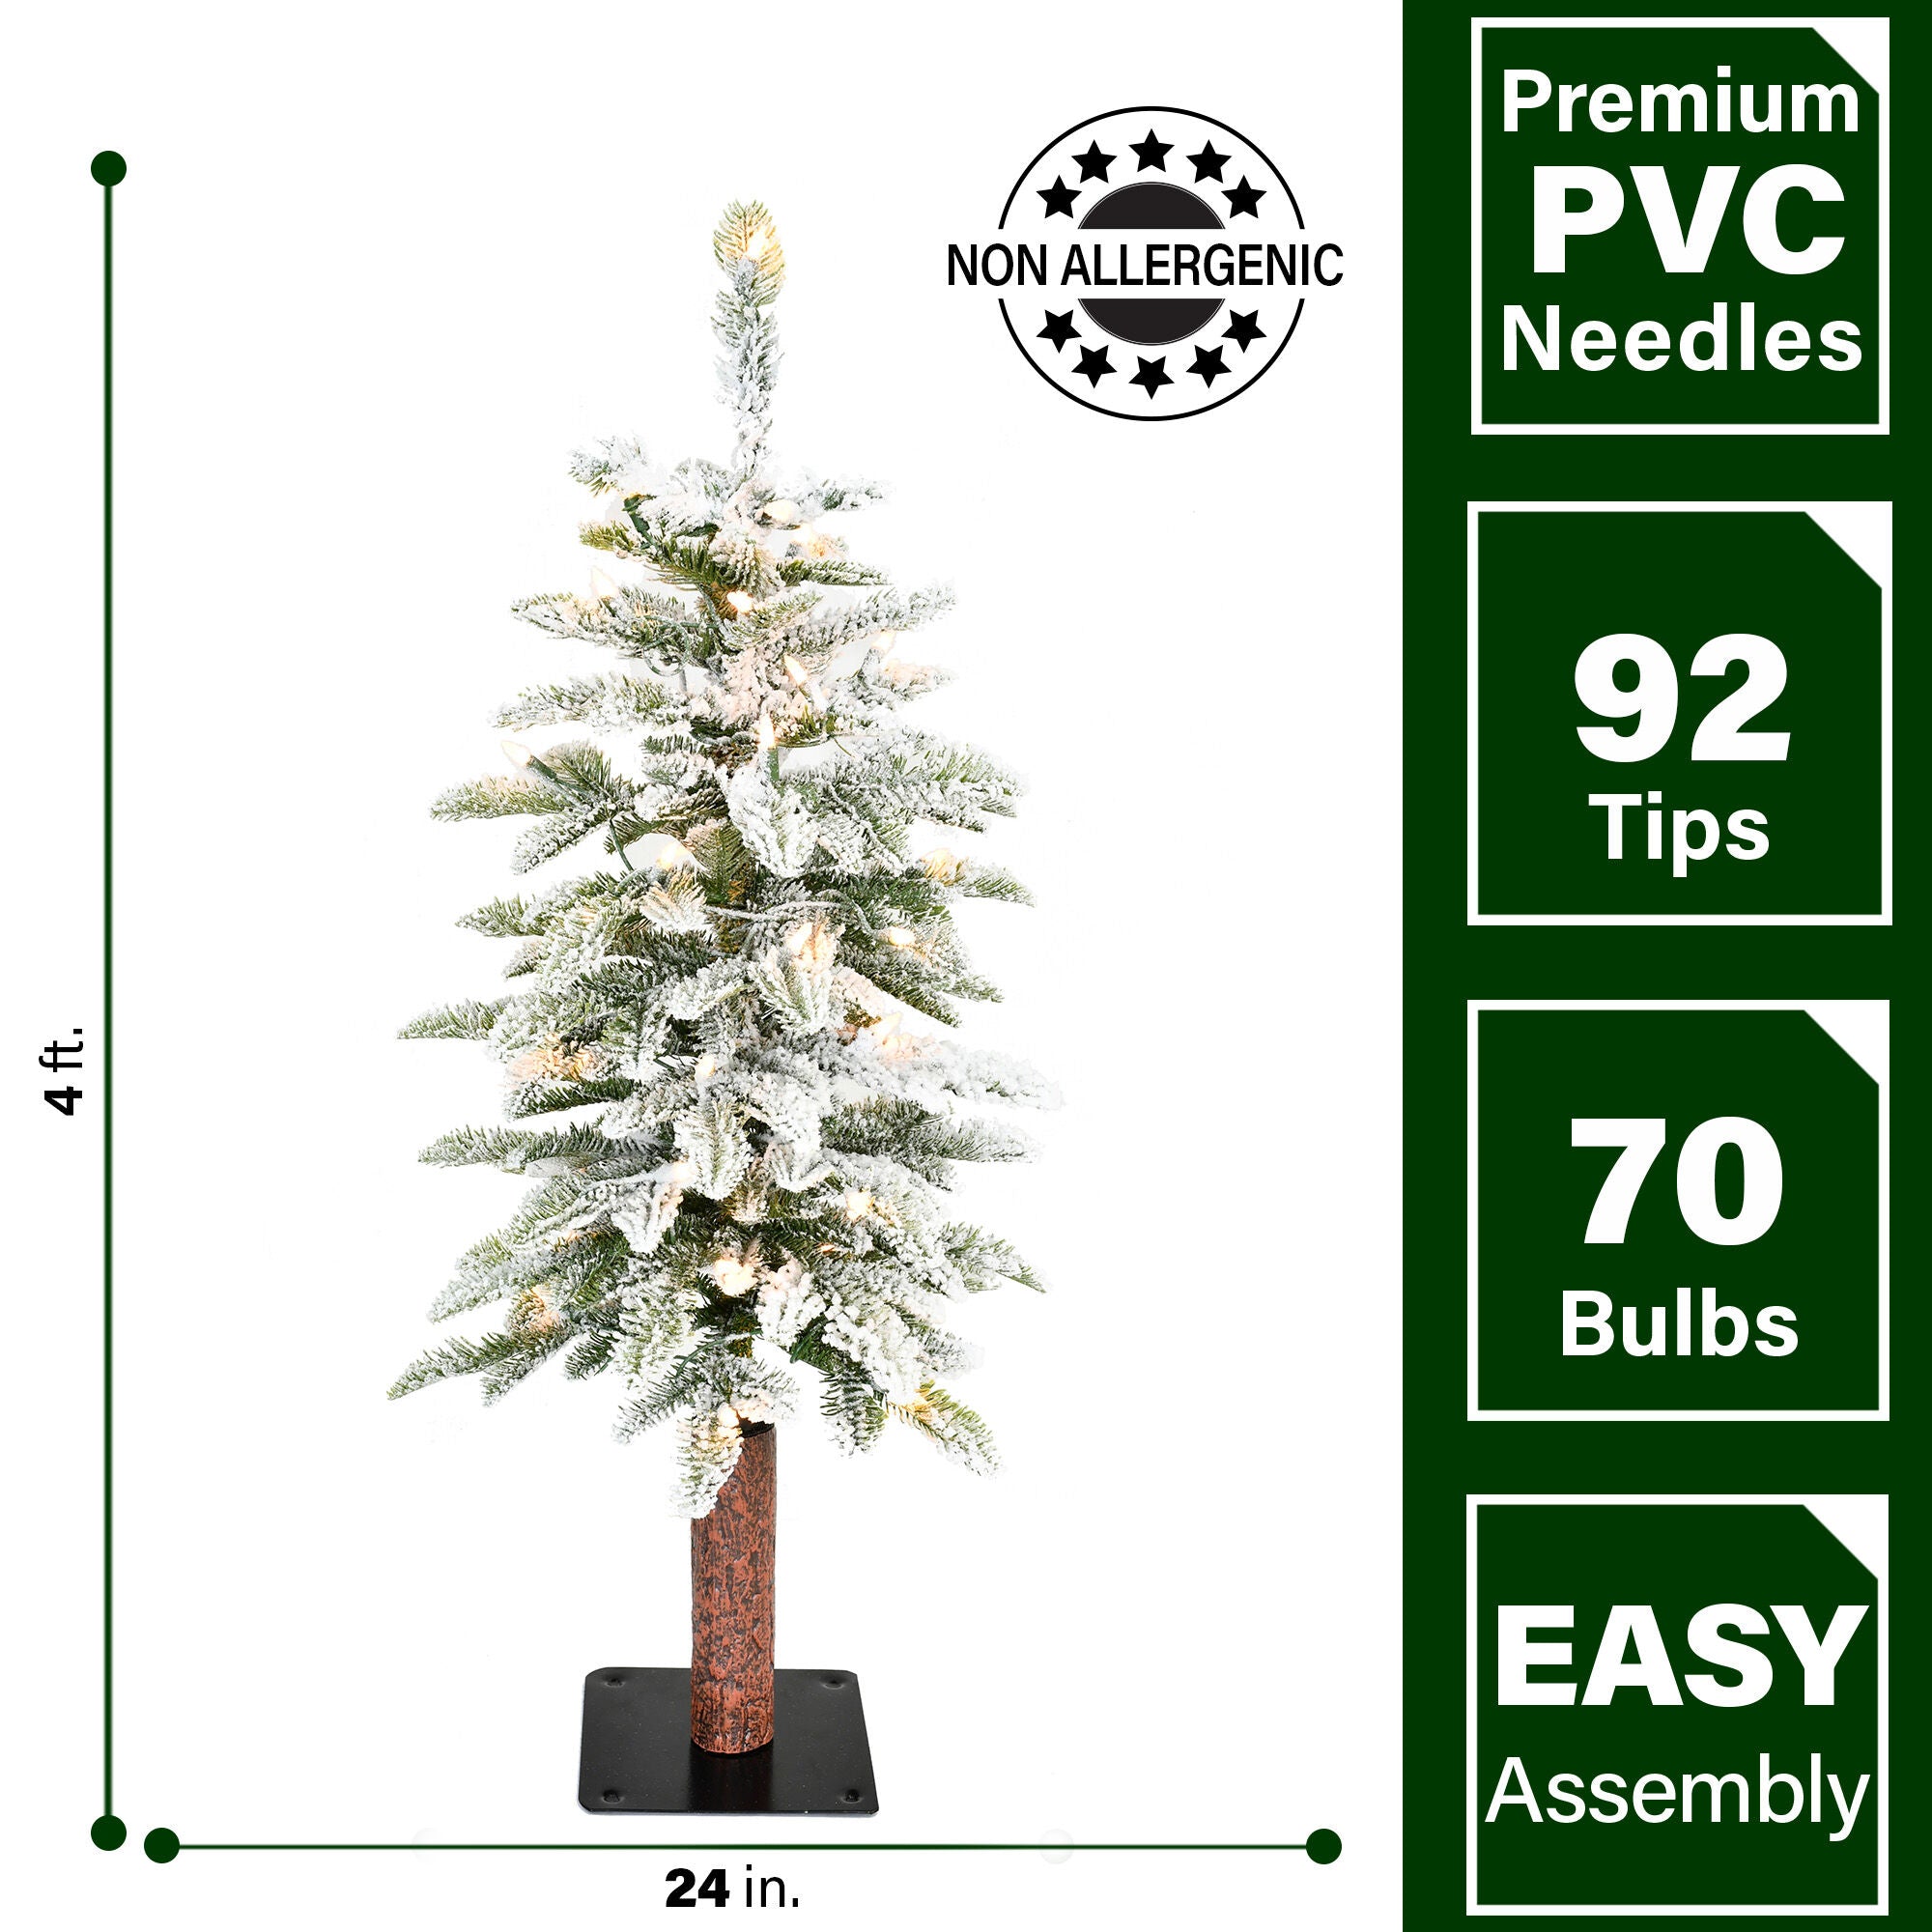 Fraser Hill Farm -  Set of 3 Snowy Downswept Trees with Clear Lights in 2-Ft., 3-Ft., and 4-Ft. Sizes